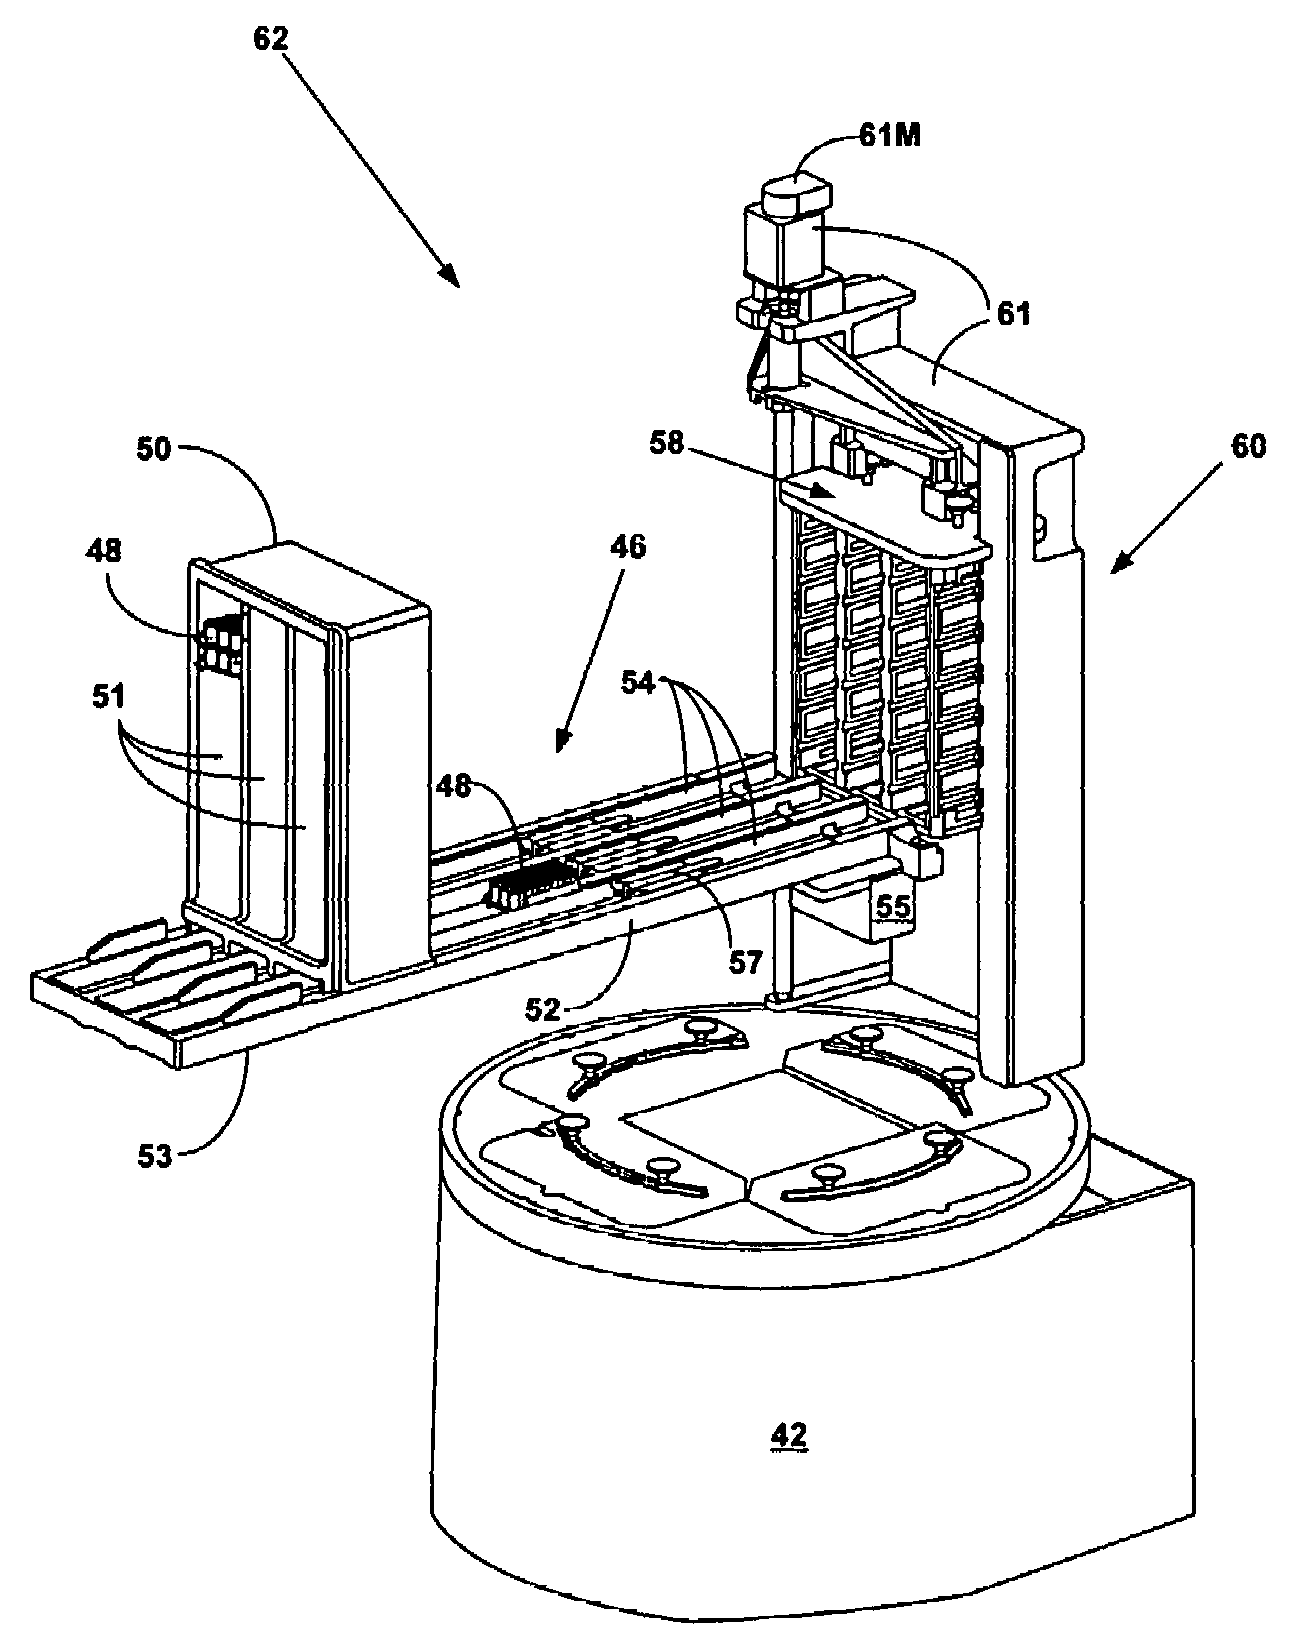 System for automatically storing and reprocessing patient sample's in an automatic clinical analyzer